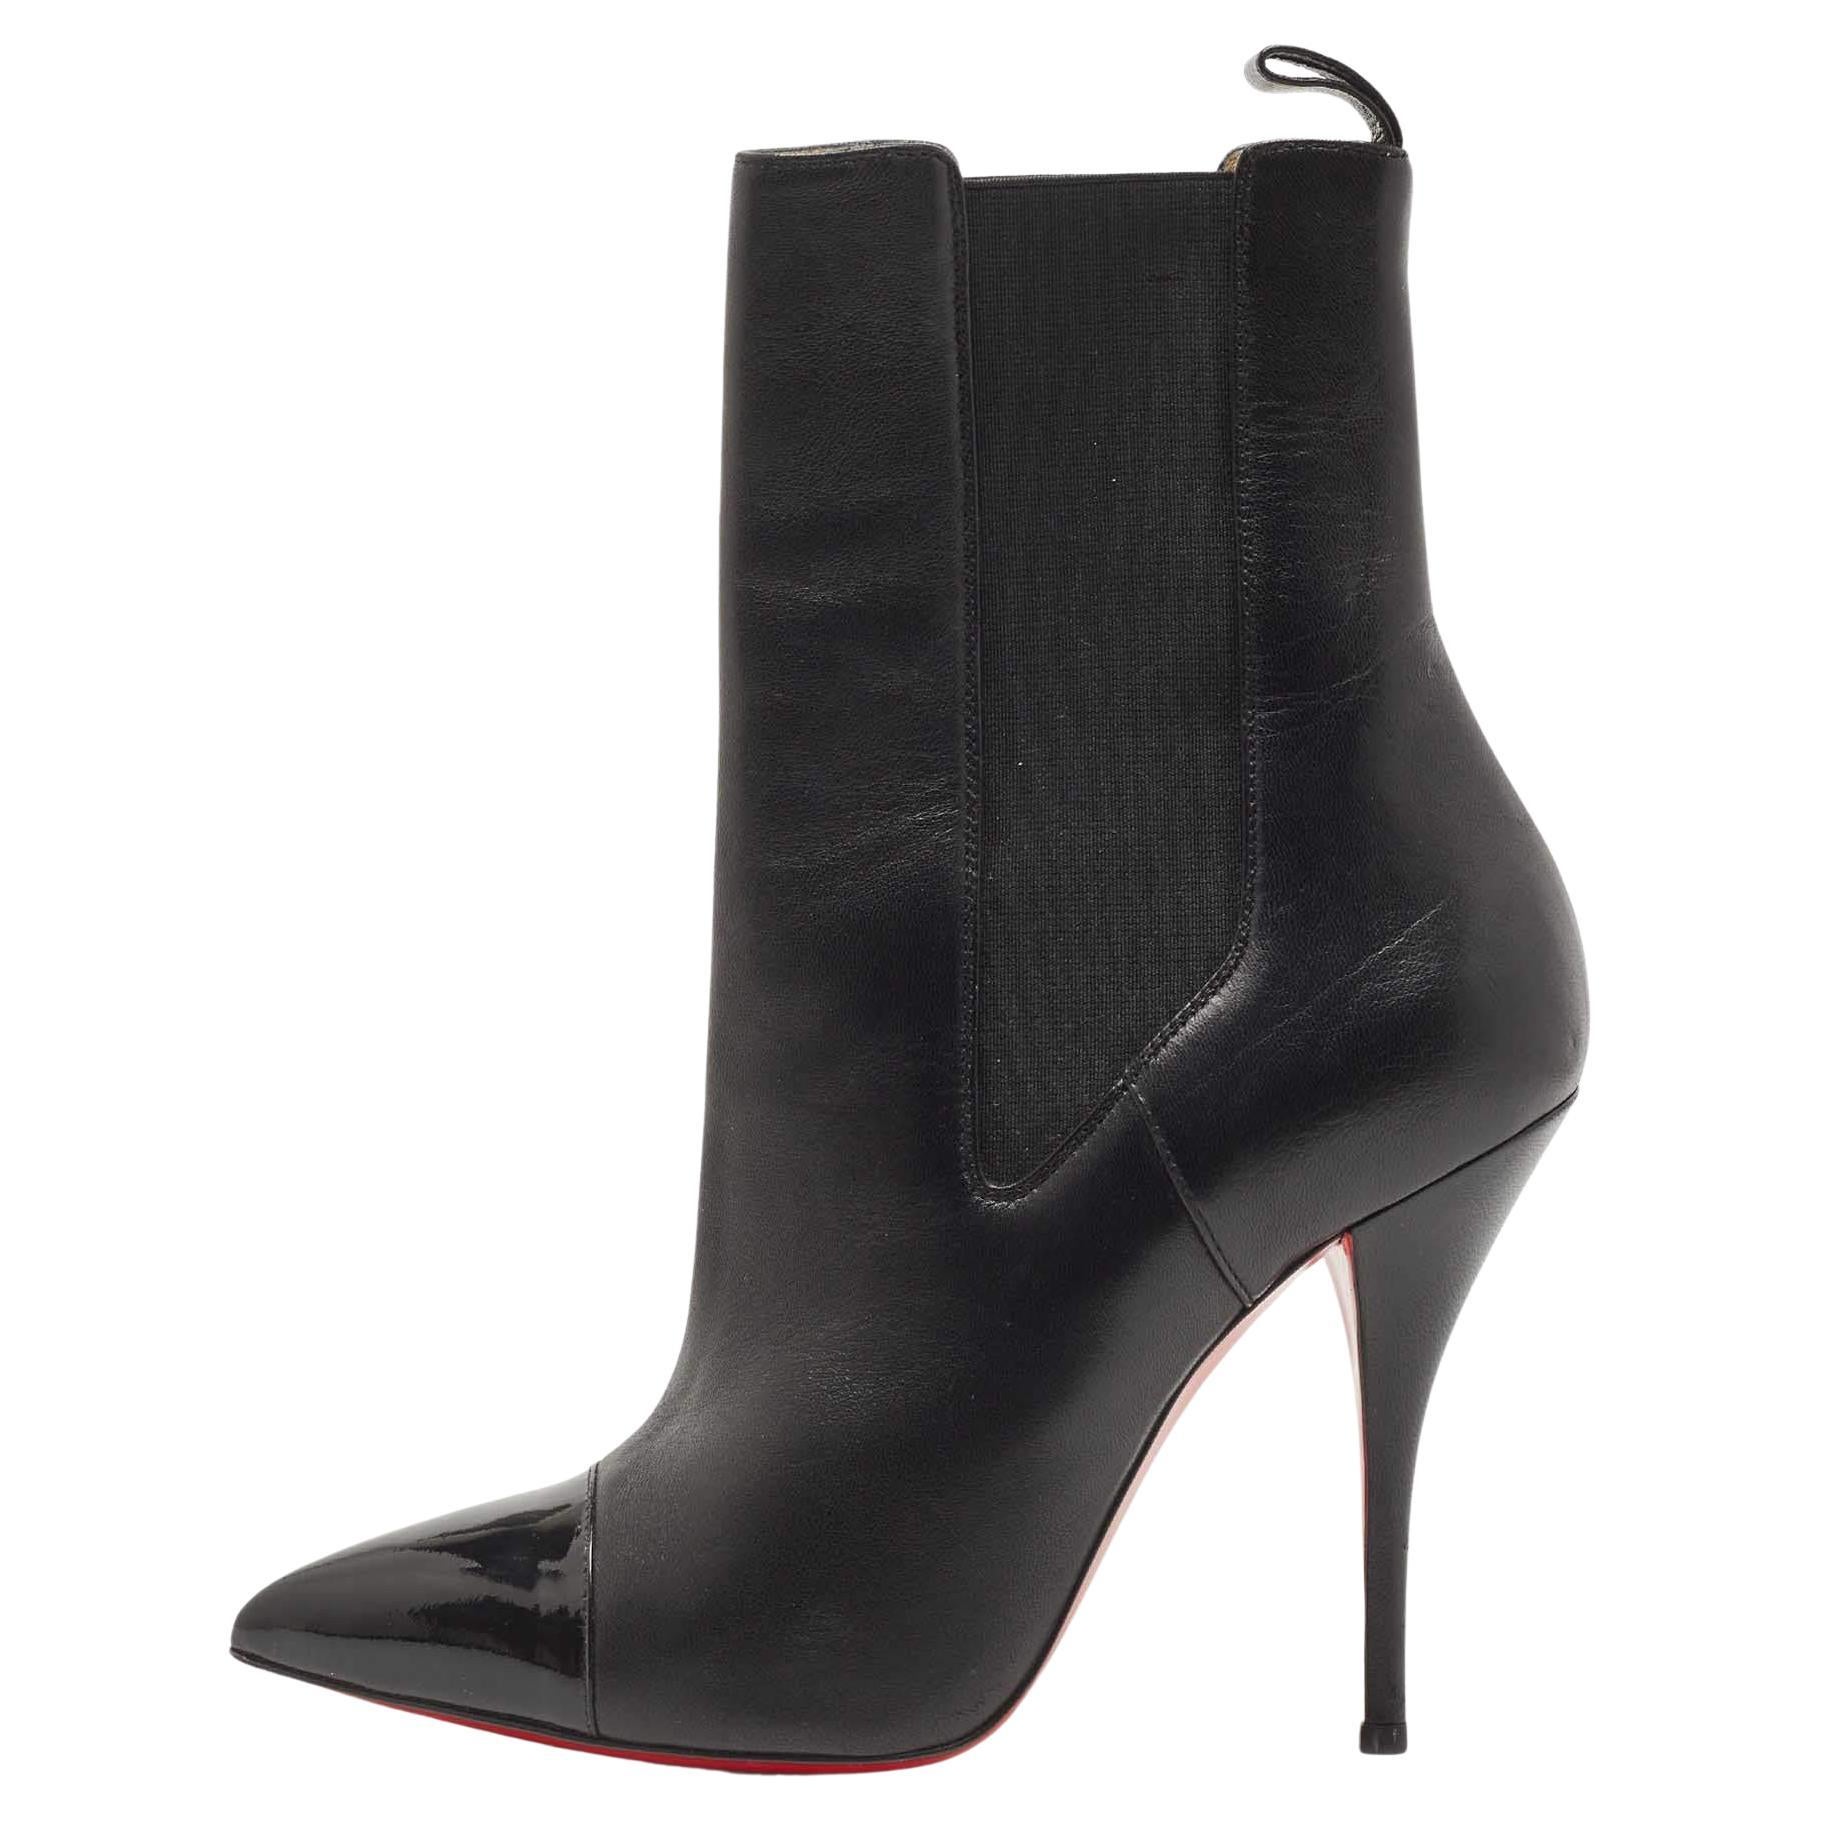 Christian Louboutin Black Leather and Patent Tuscon Booties Size 38